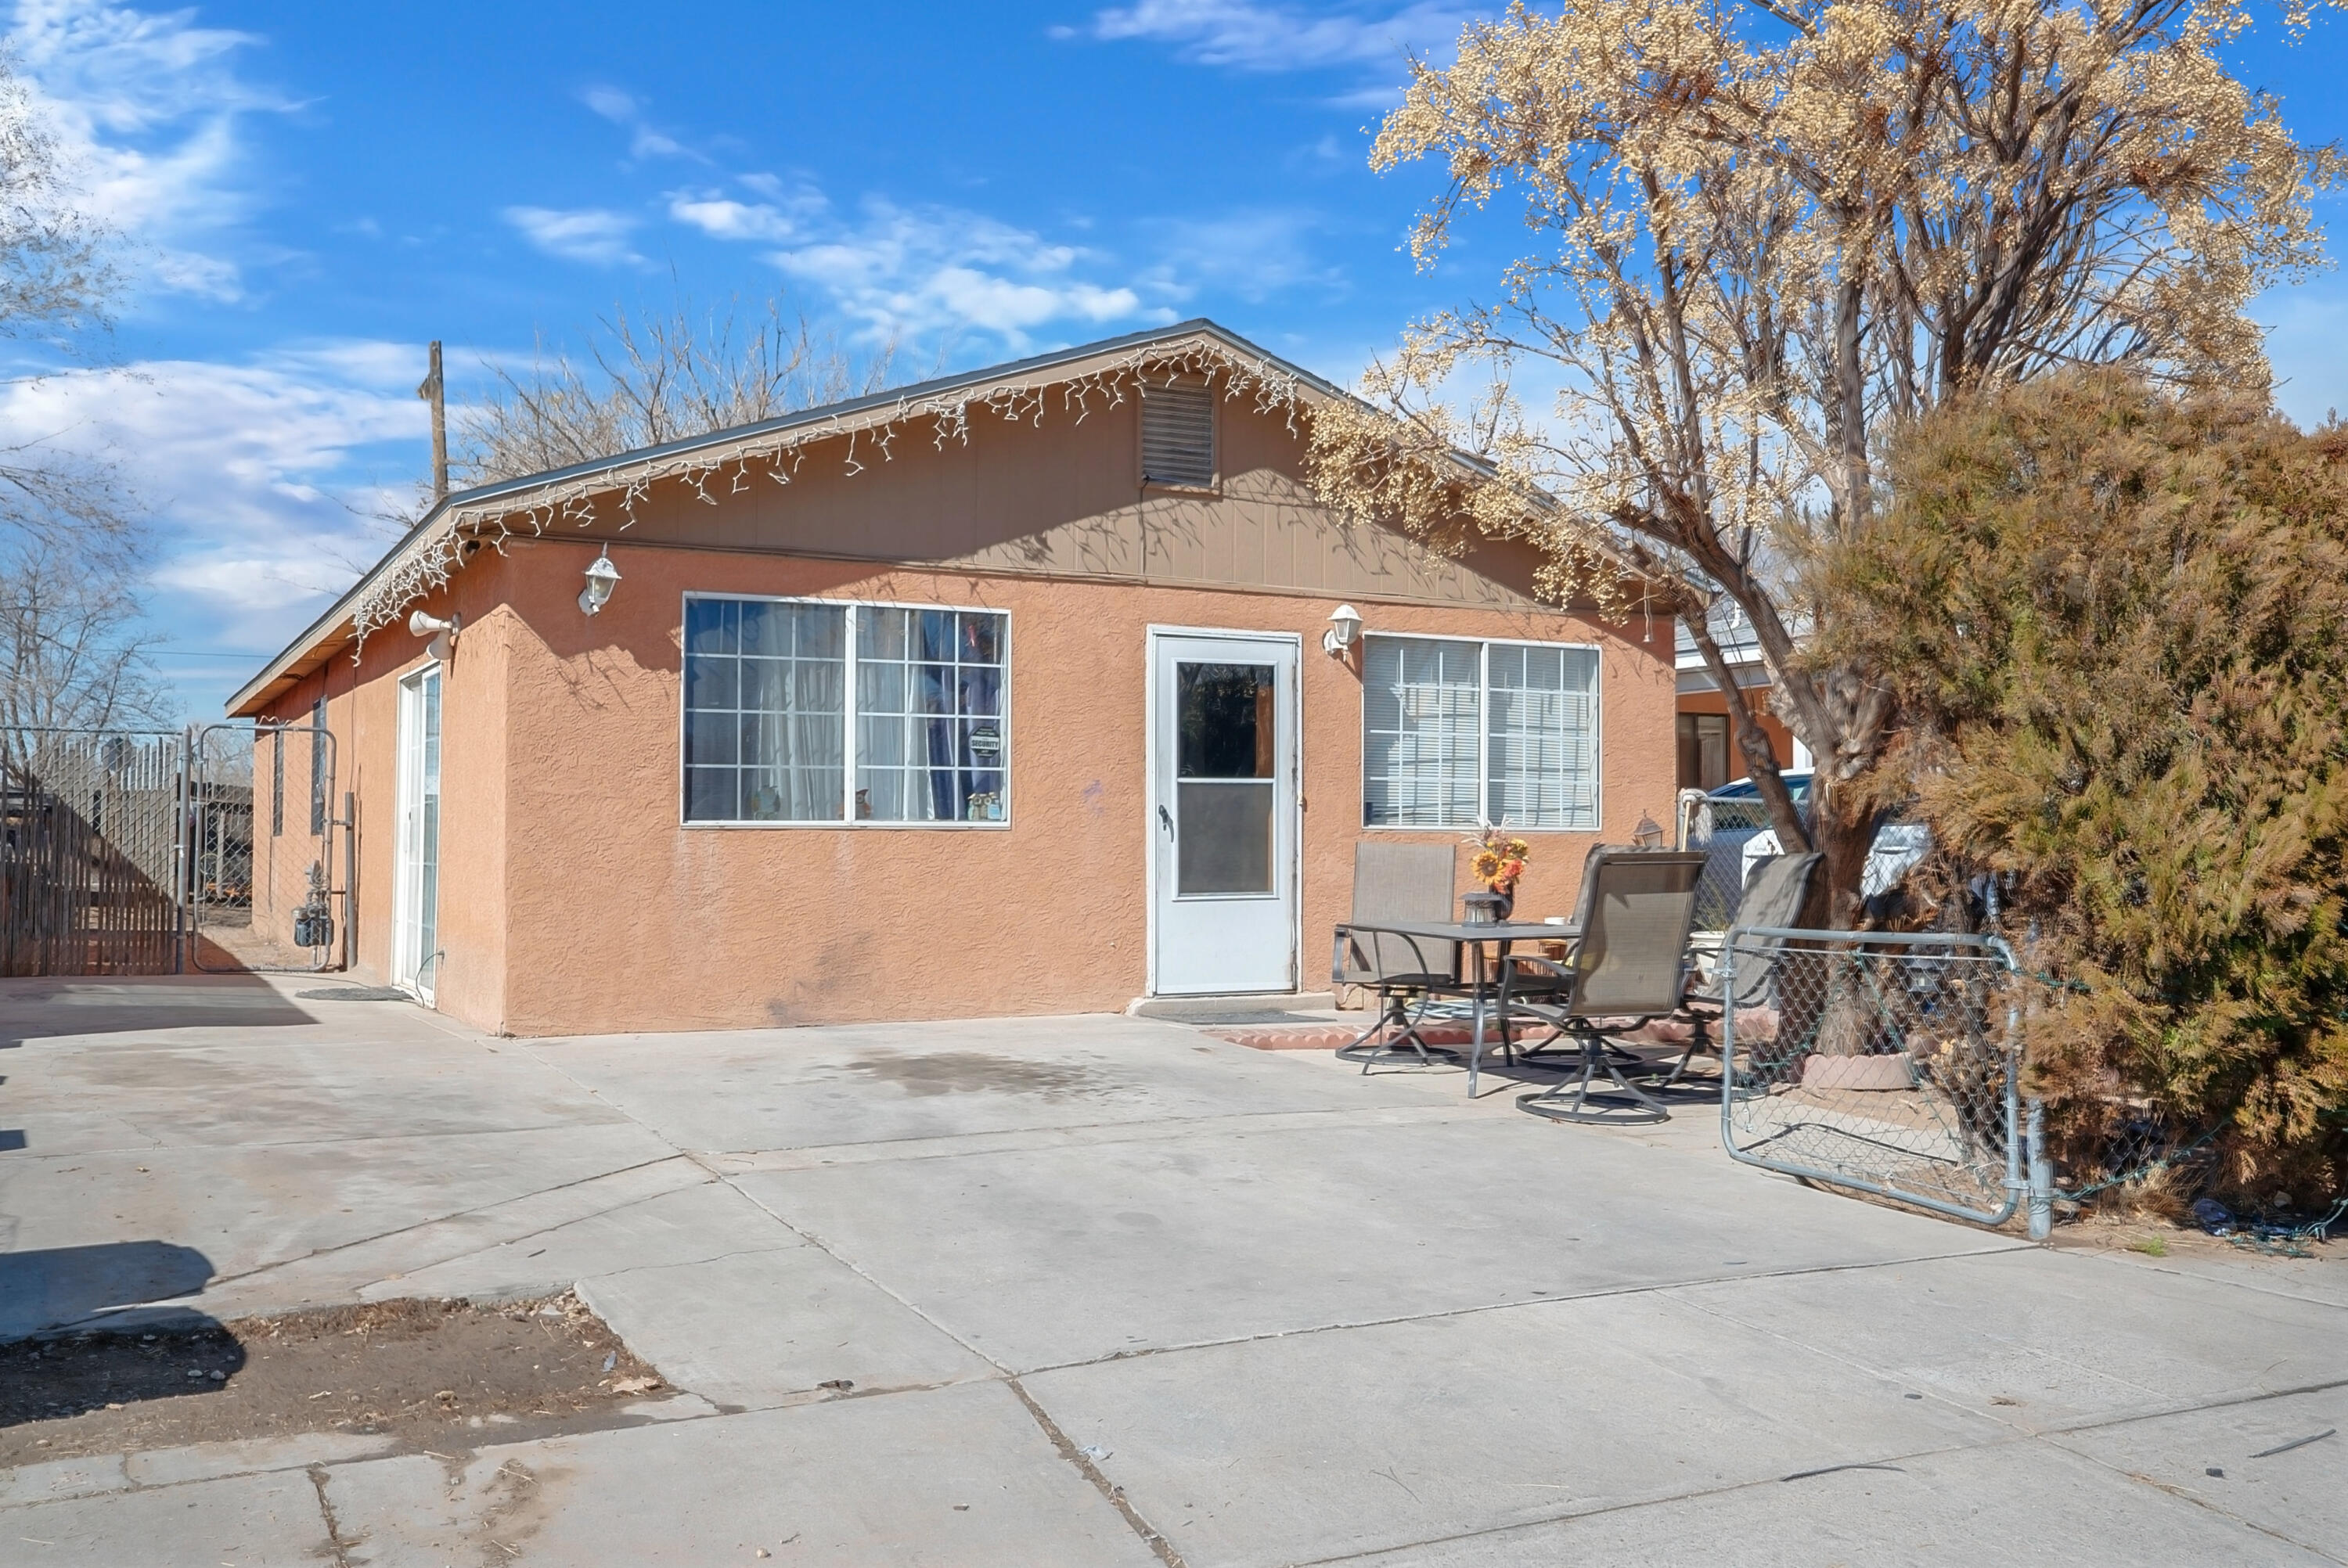 Charming Bernalillo Home! Come cozy up in this three-bedroom, one-bath home, with an open concept in the living areas and dining! The kitchen features a gas range! Located minutes away from parks, restaurants, and downtown Bernalillo. Looking for an Investment opportunity?! The house is currently rented, and the tenant would love to stay! Take a virtual walkthrough tour today, or schedule a private showing! Please allow 24 hours' notice for all showings.